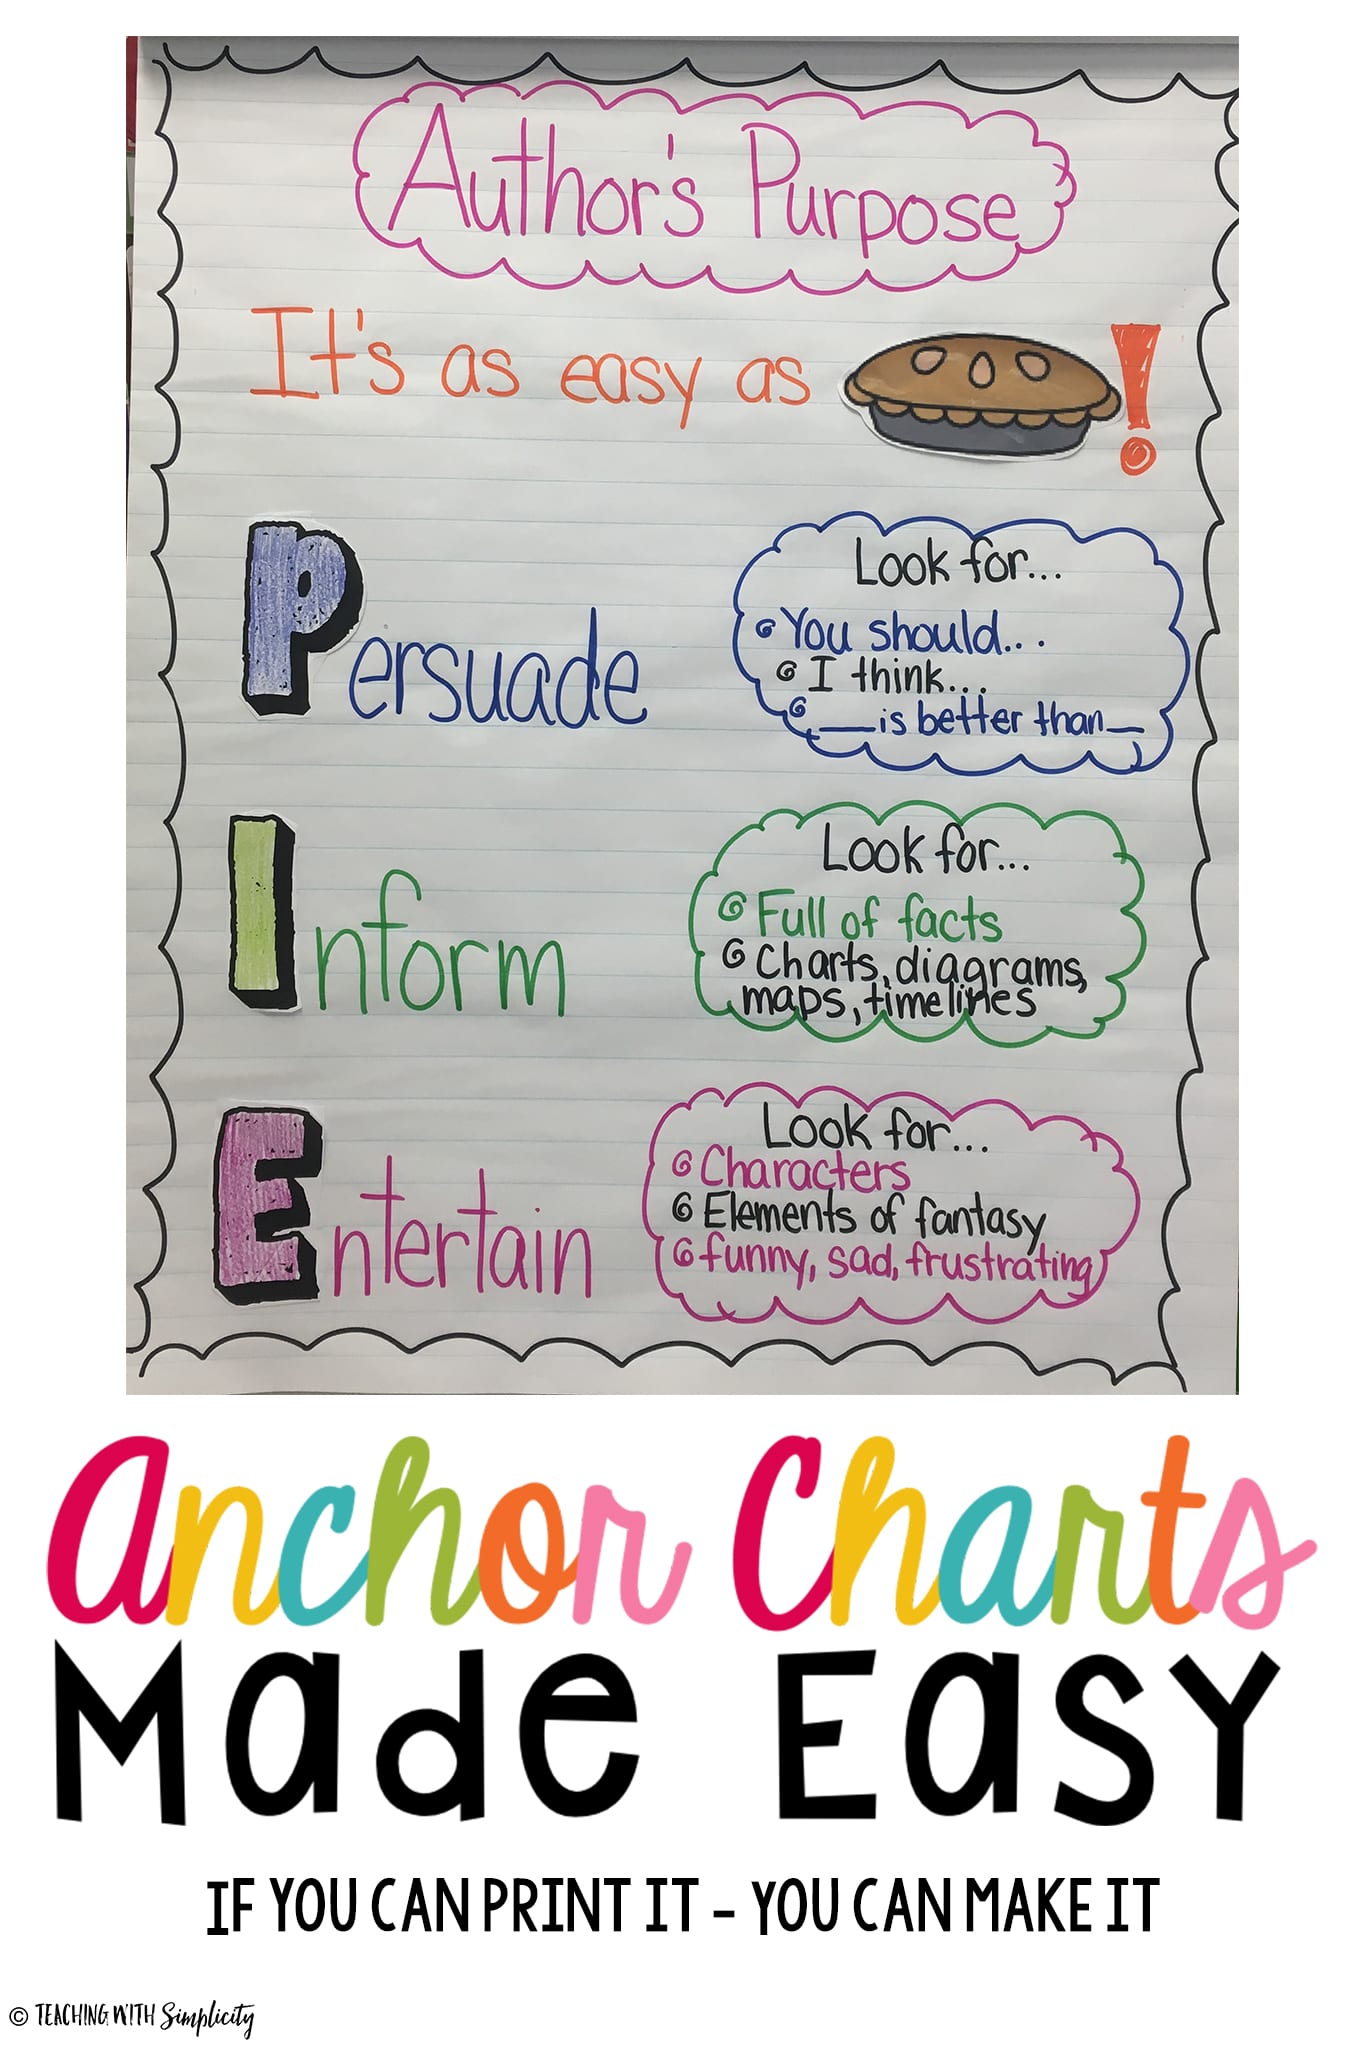 anchor-charts-made-easy-authors-purpose.jpg